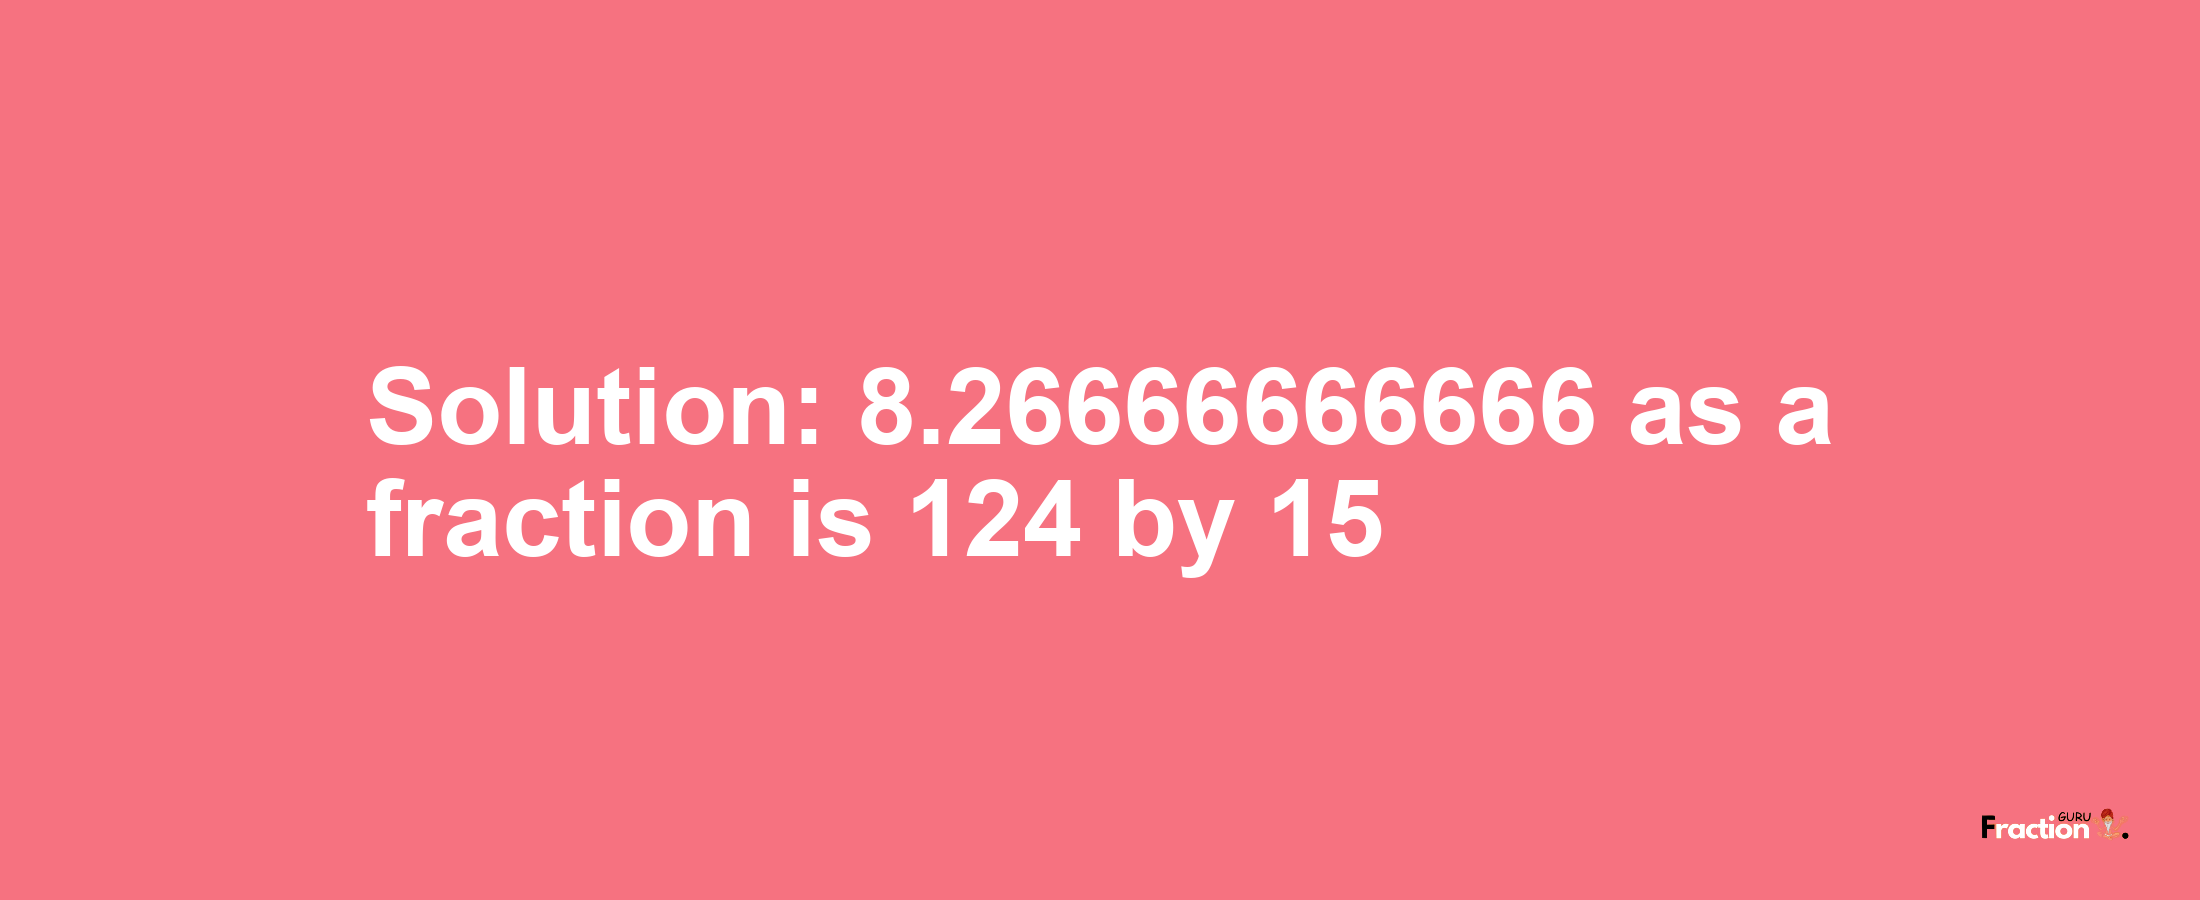 Solution:8.26666666666 as a fraction is 124/15